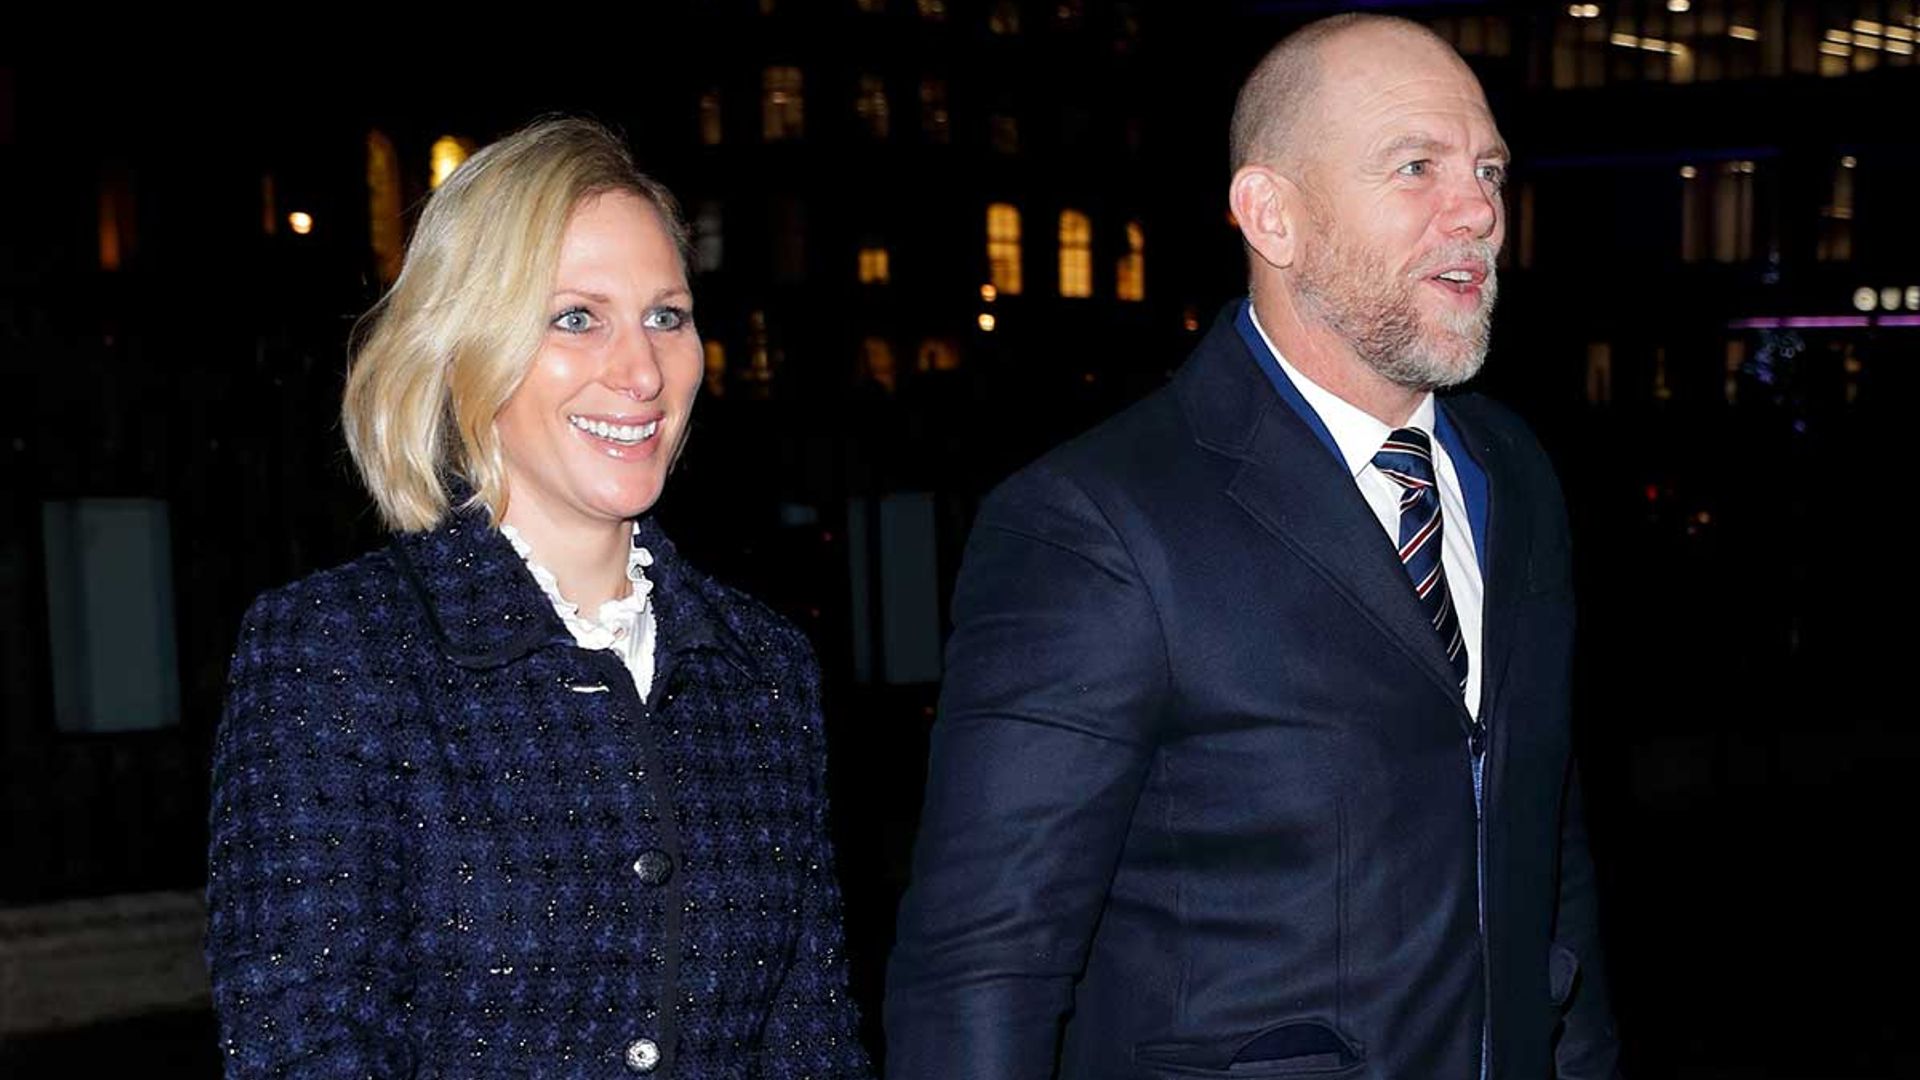 Mike Tindall reveals he and Zara have two Christmas trees at country home